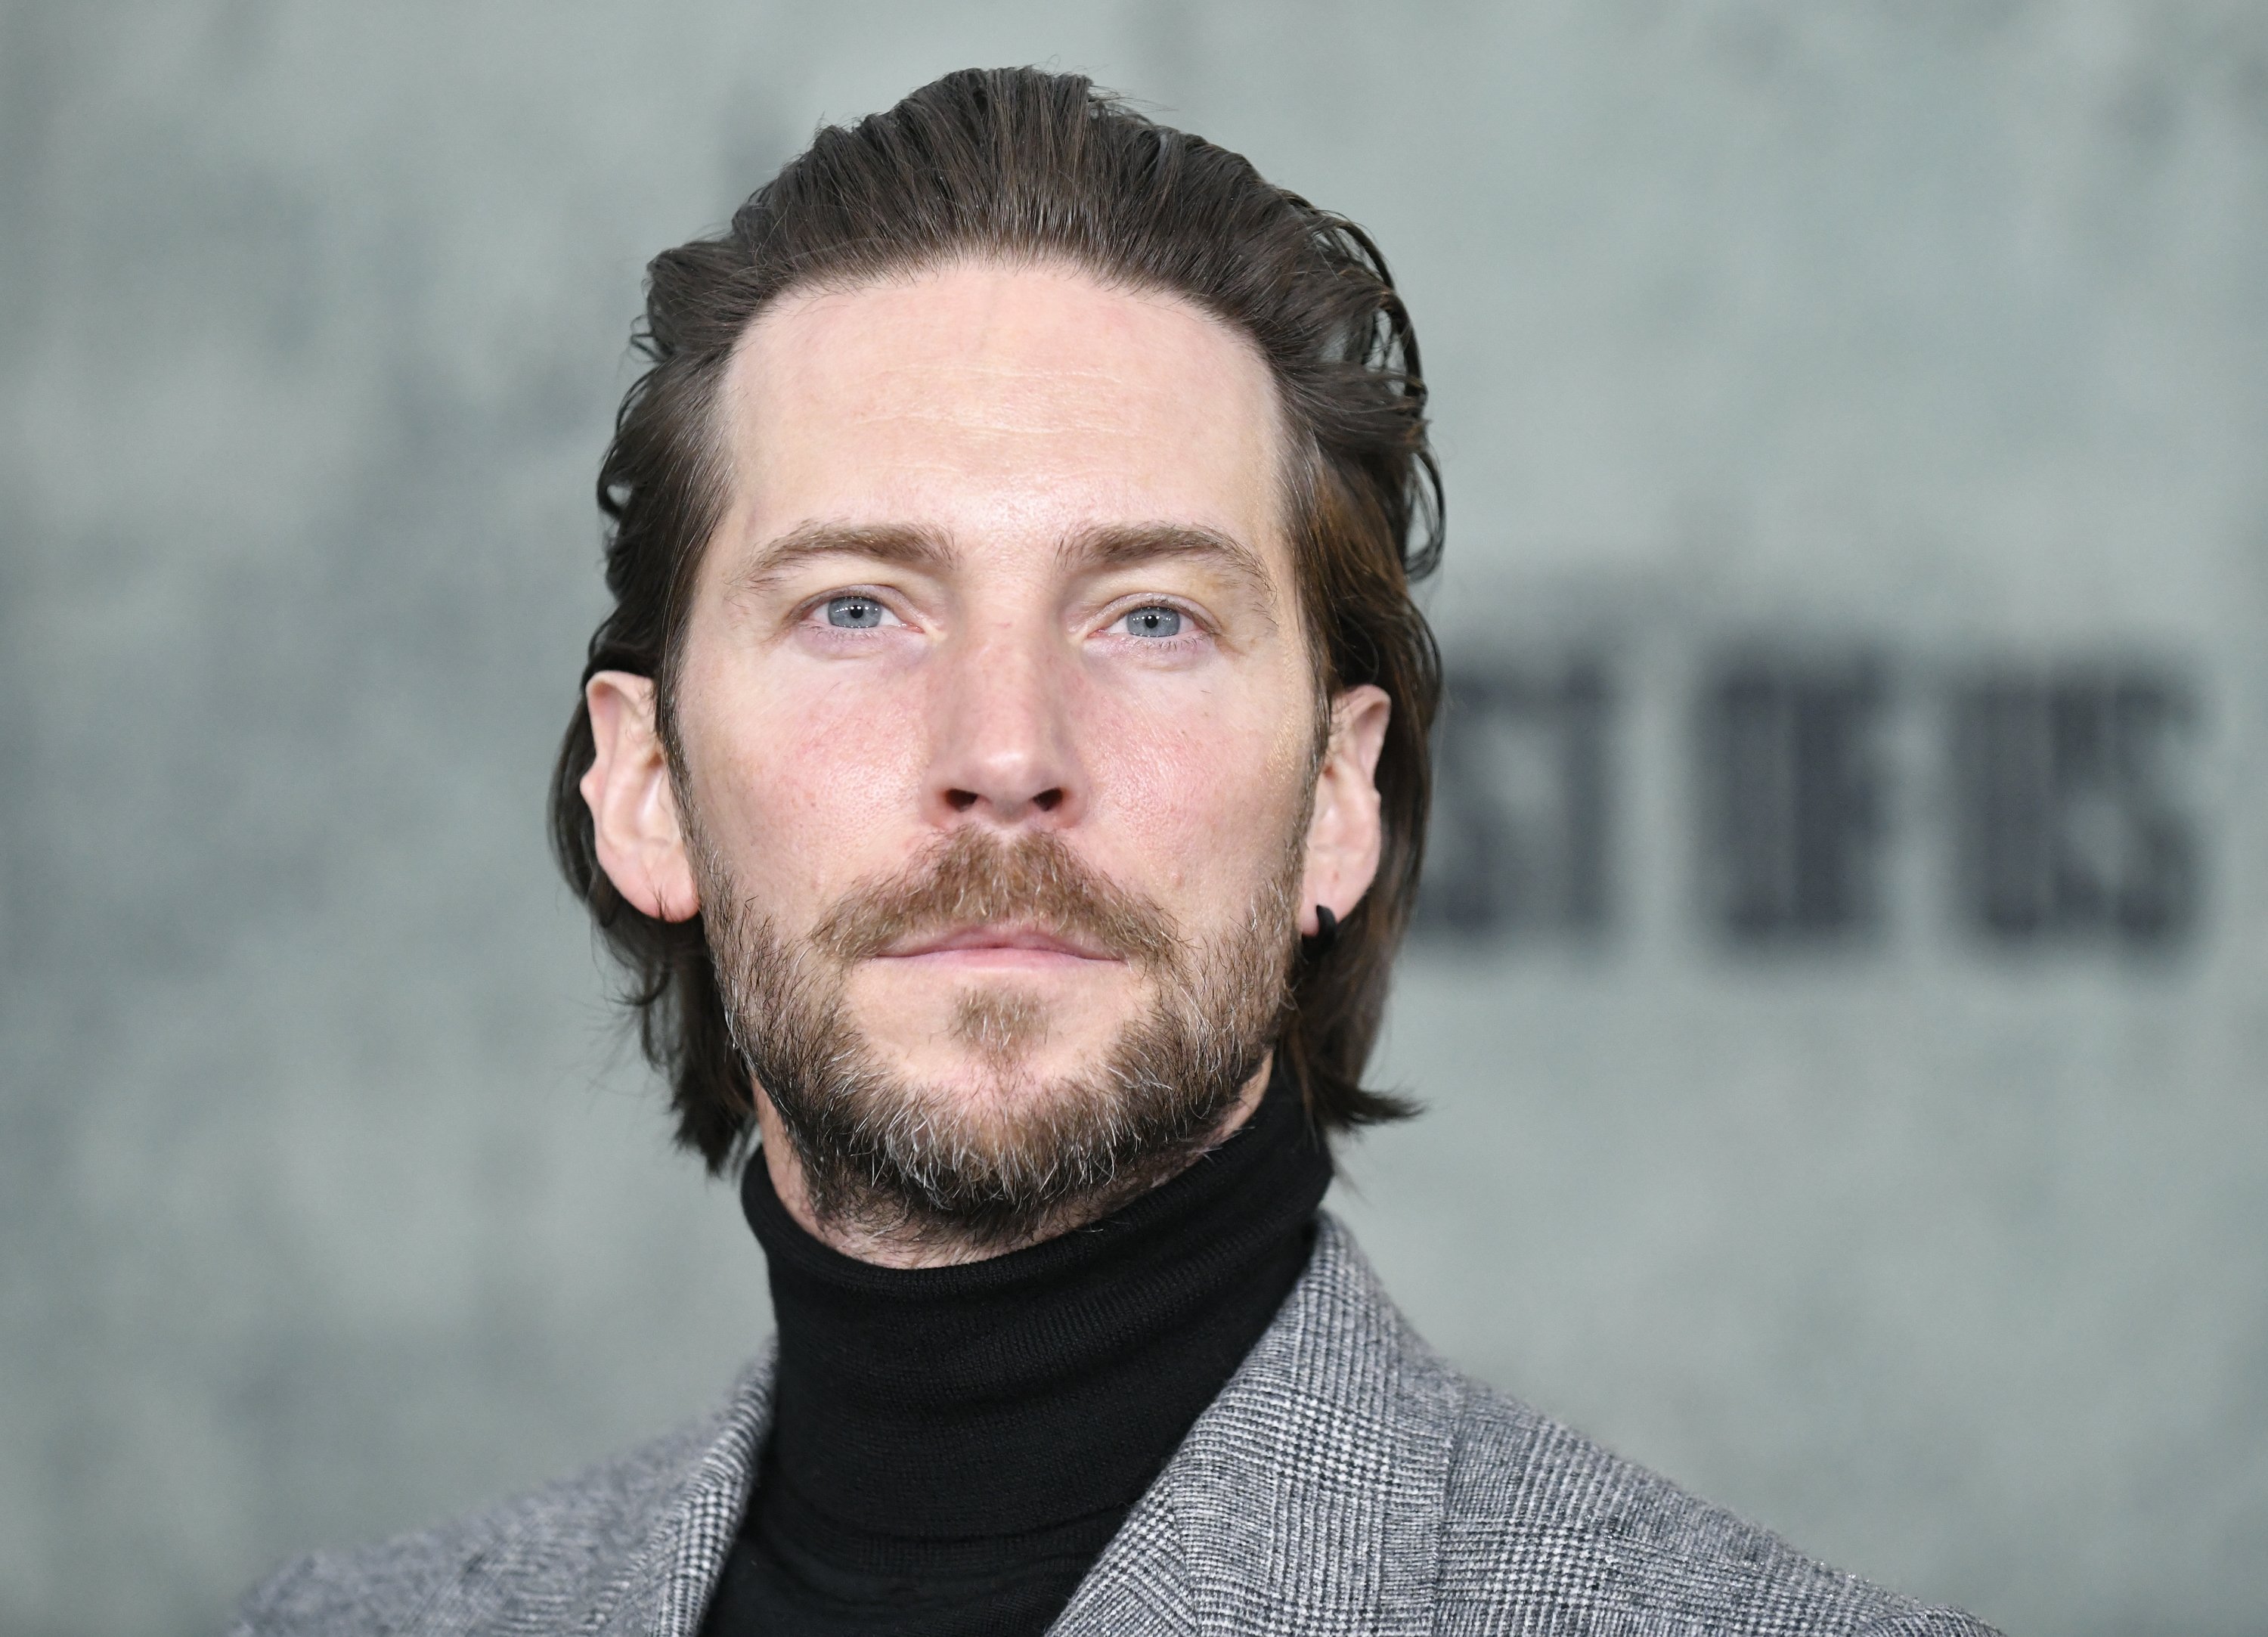 Troy Baker at the LA premiere of "The Last of Us" hosted at Regency Village Theatre in Los Angeles, California, on January 9, 2023. | Source: Getty Images